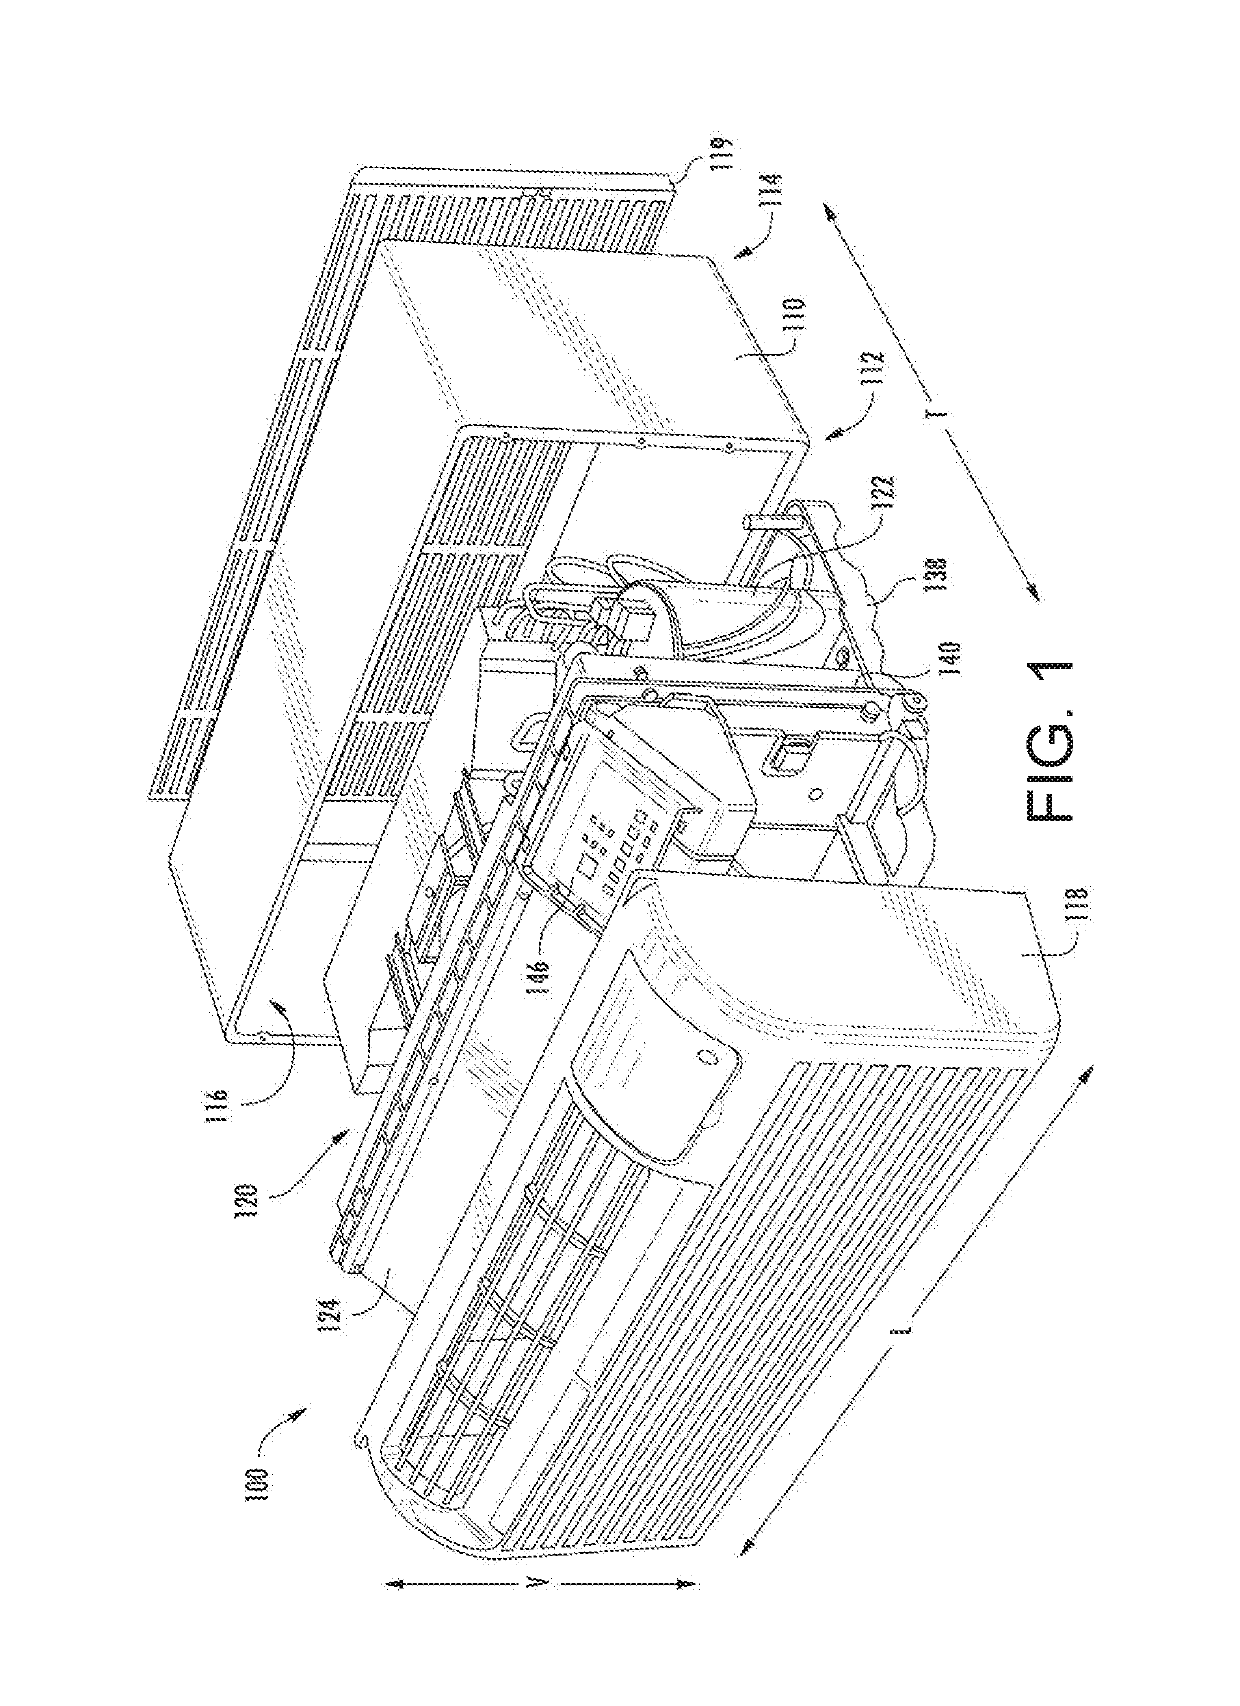 Lockout display method for a packaged terminal air conditioner unit